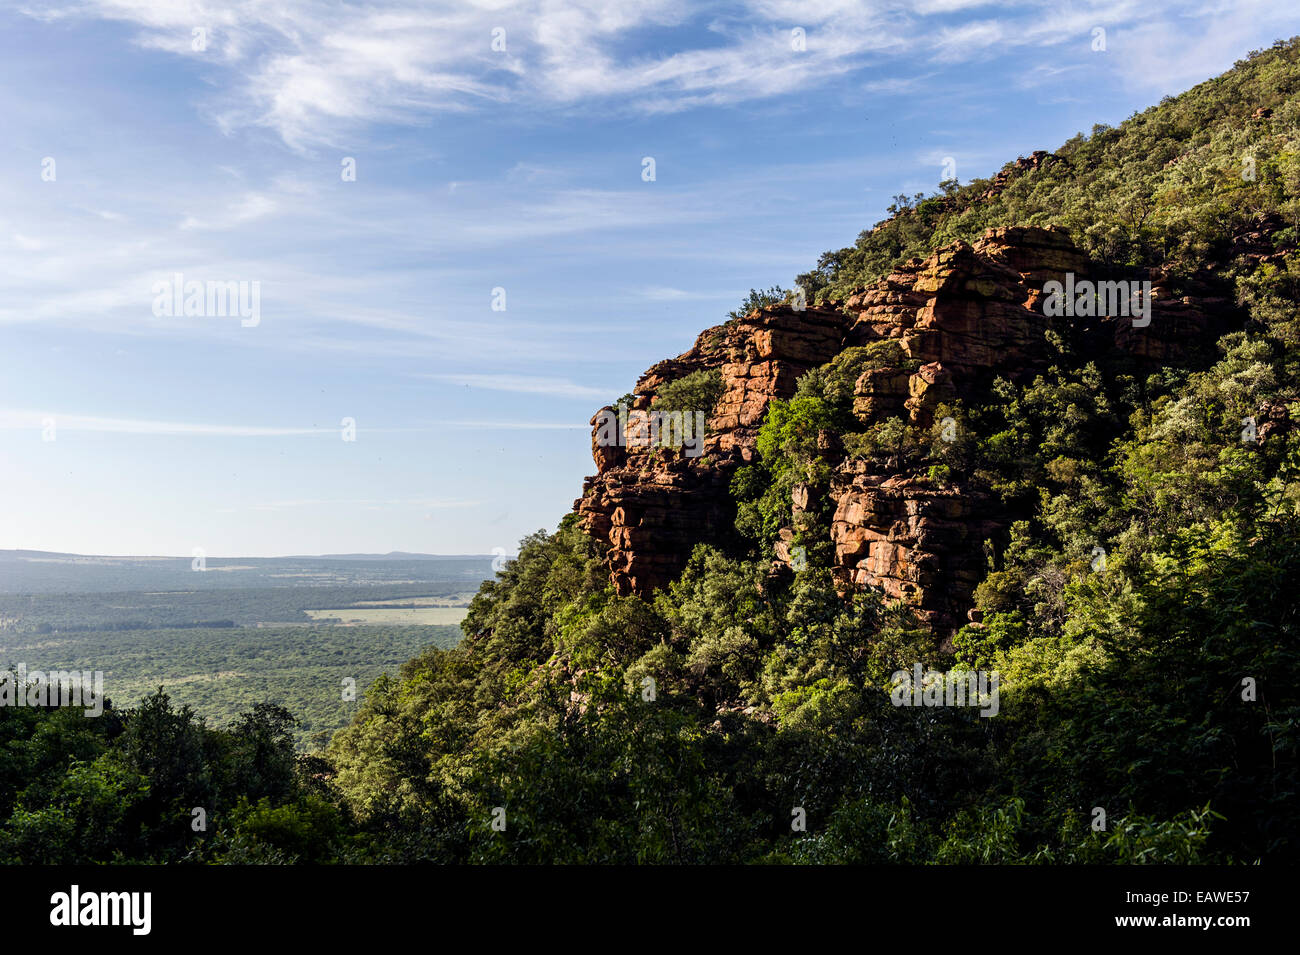 A forested gorge overlooks a vast savannah plain dotted with woodland. Stock Photo